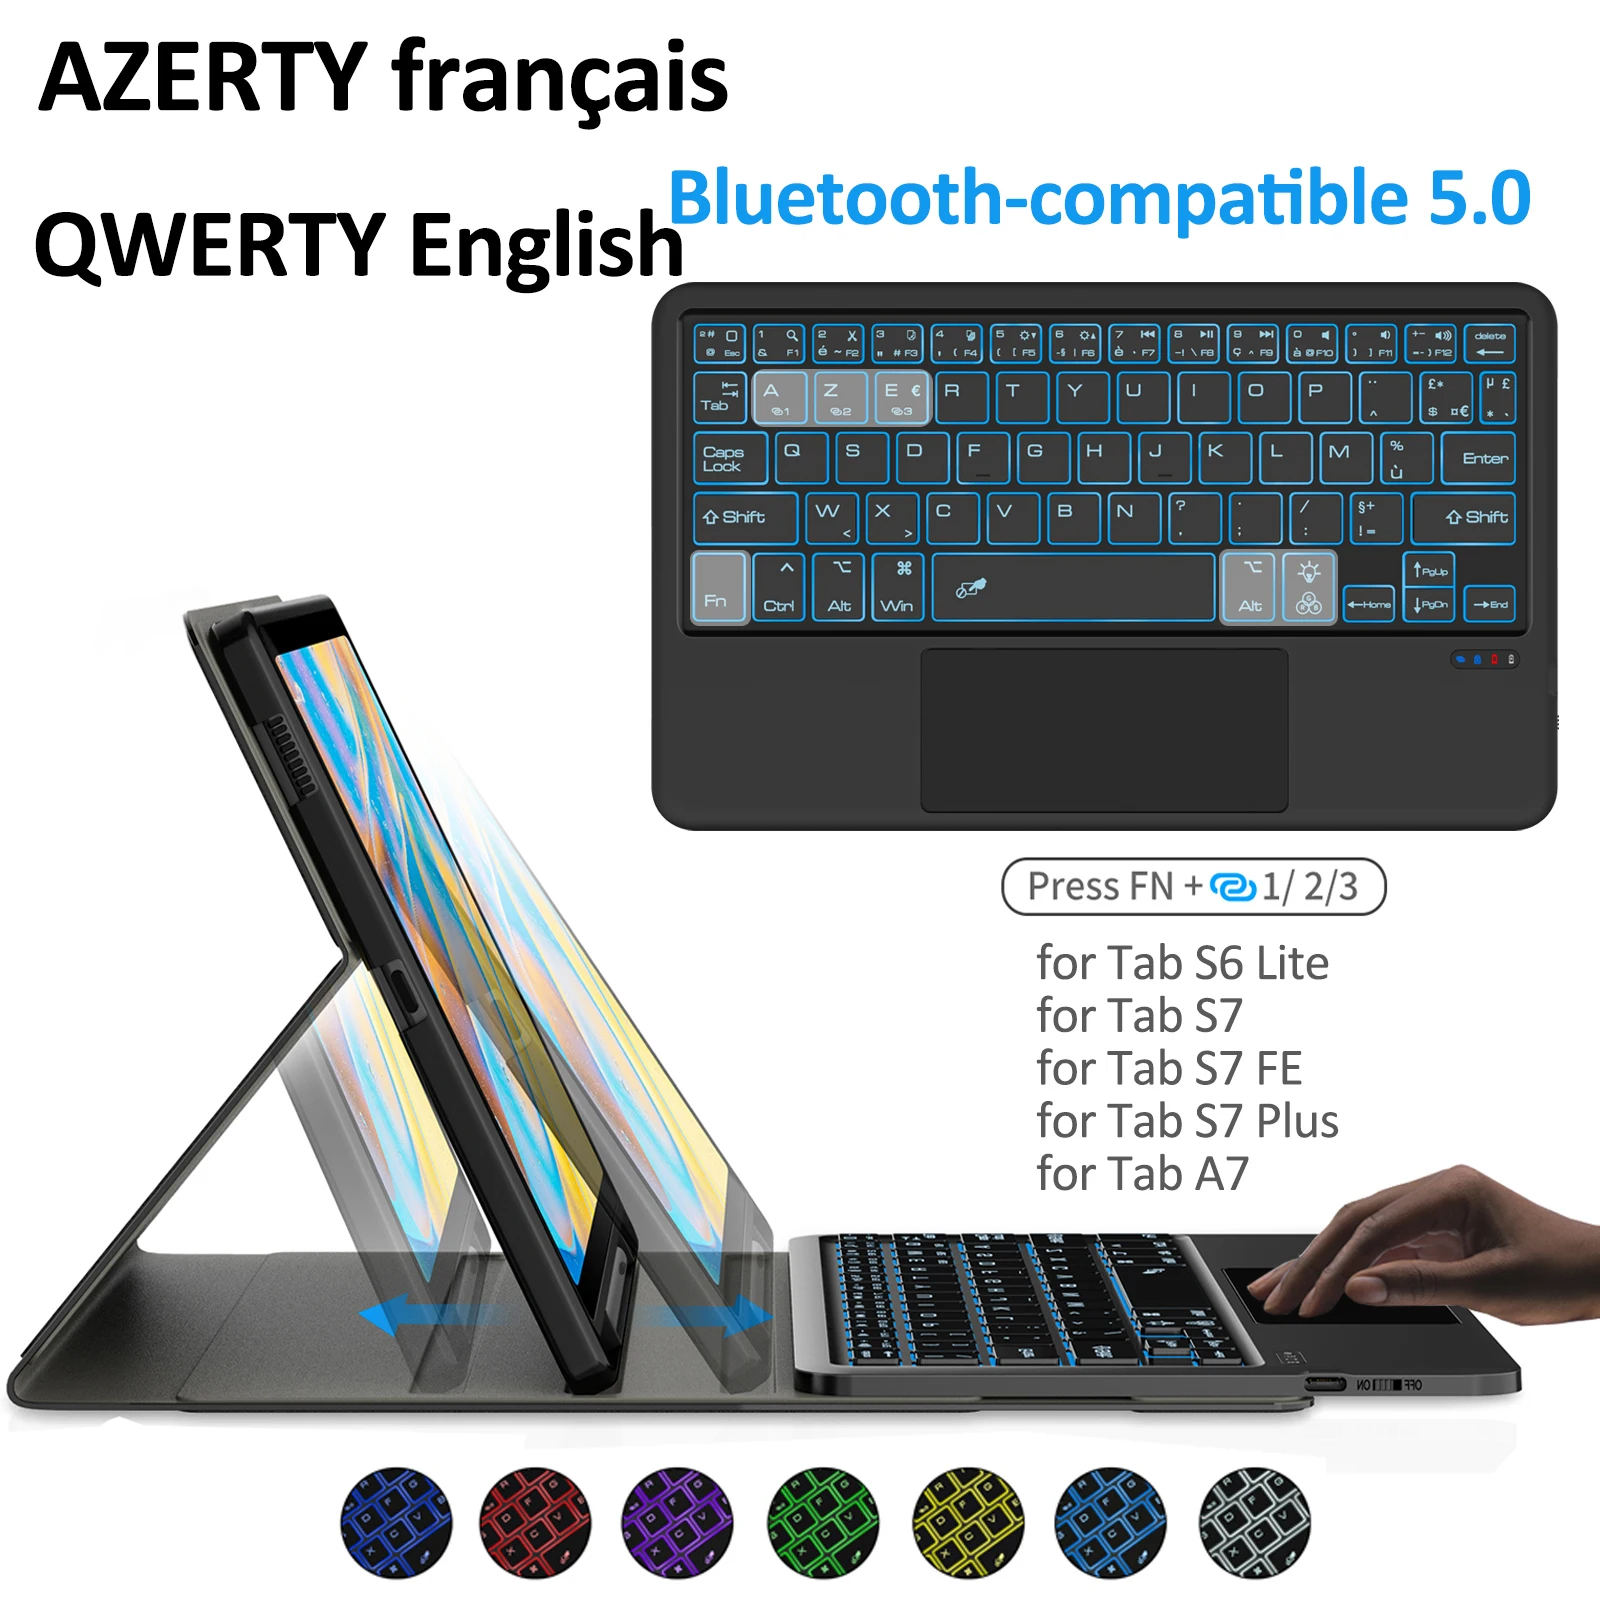 

AZERTY French Keyboard Case for Samsung Galaxy Tab S6 Lite Cover BT 5.0 for Galaxy A8 A7 S7 FE Plus Trackpad 7 Colors Backlight